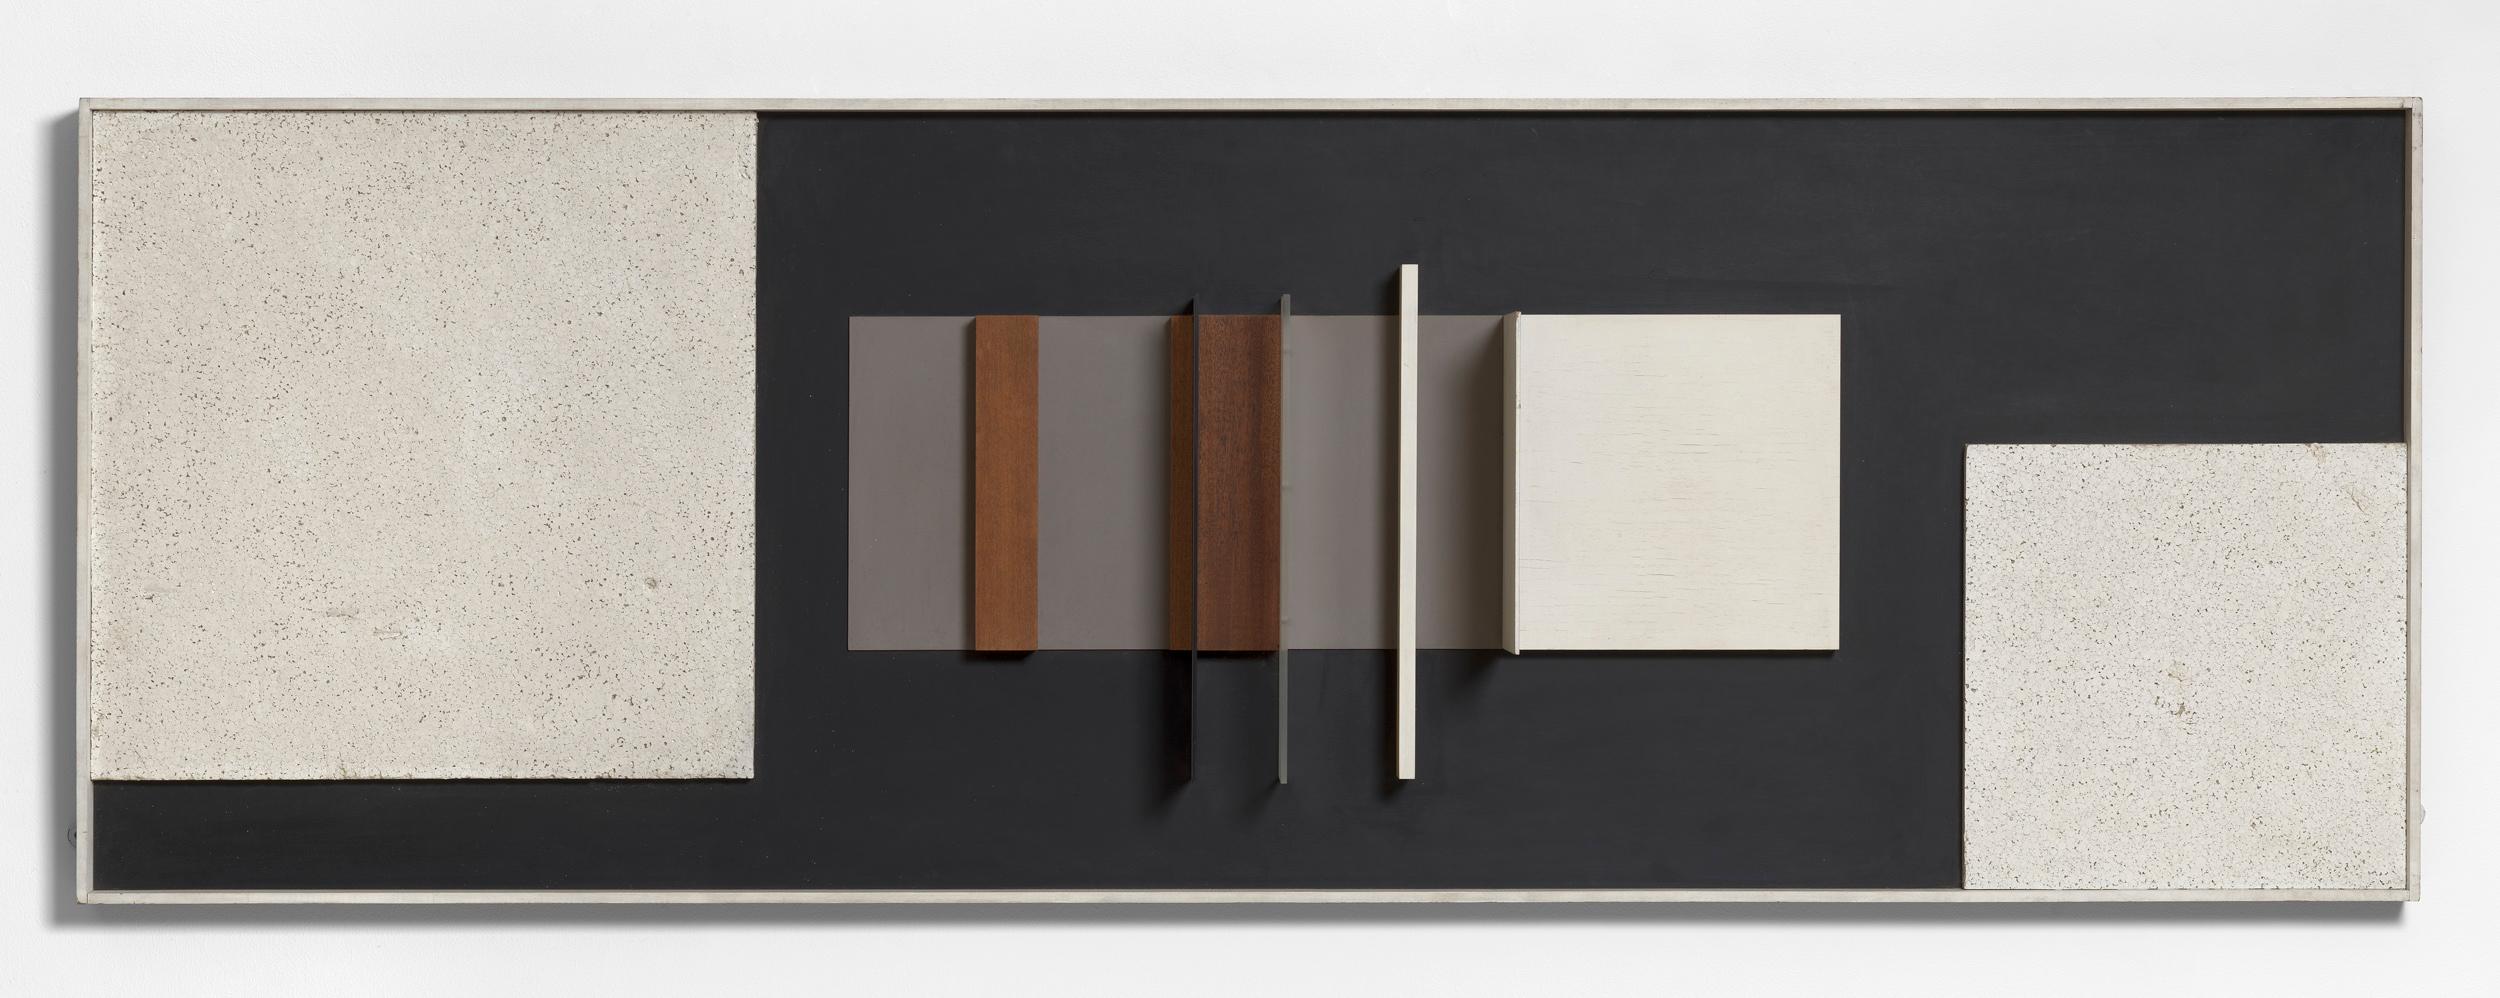 Painted wood, polystyrene and perspex relief on board.
Signed, titled and dated twice (verso).
Constructed Relief is an austerely conceived work in painted wood, polystyrene and perspex, composed rigidly of squares, planes and rectangles. It